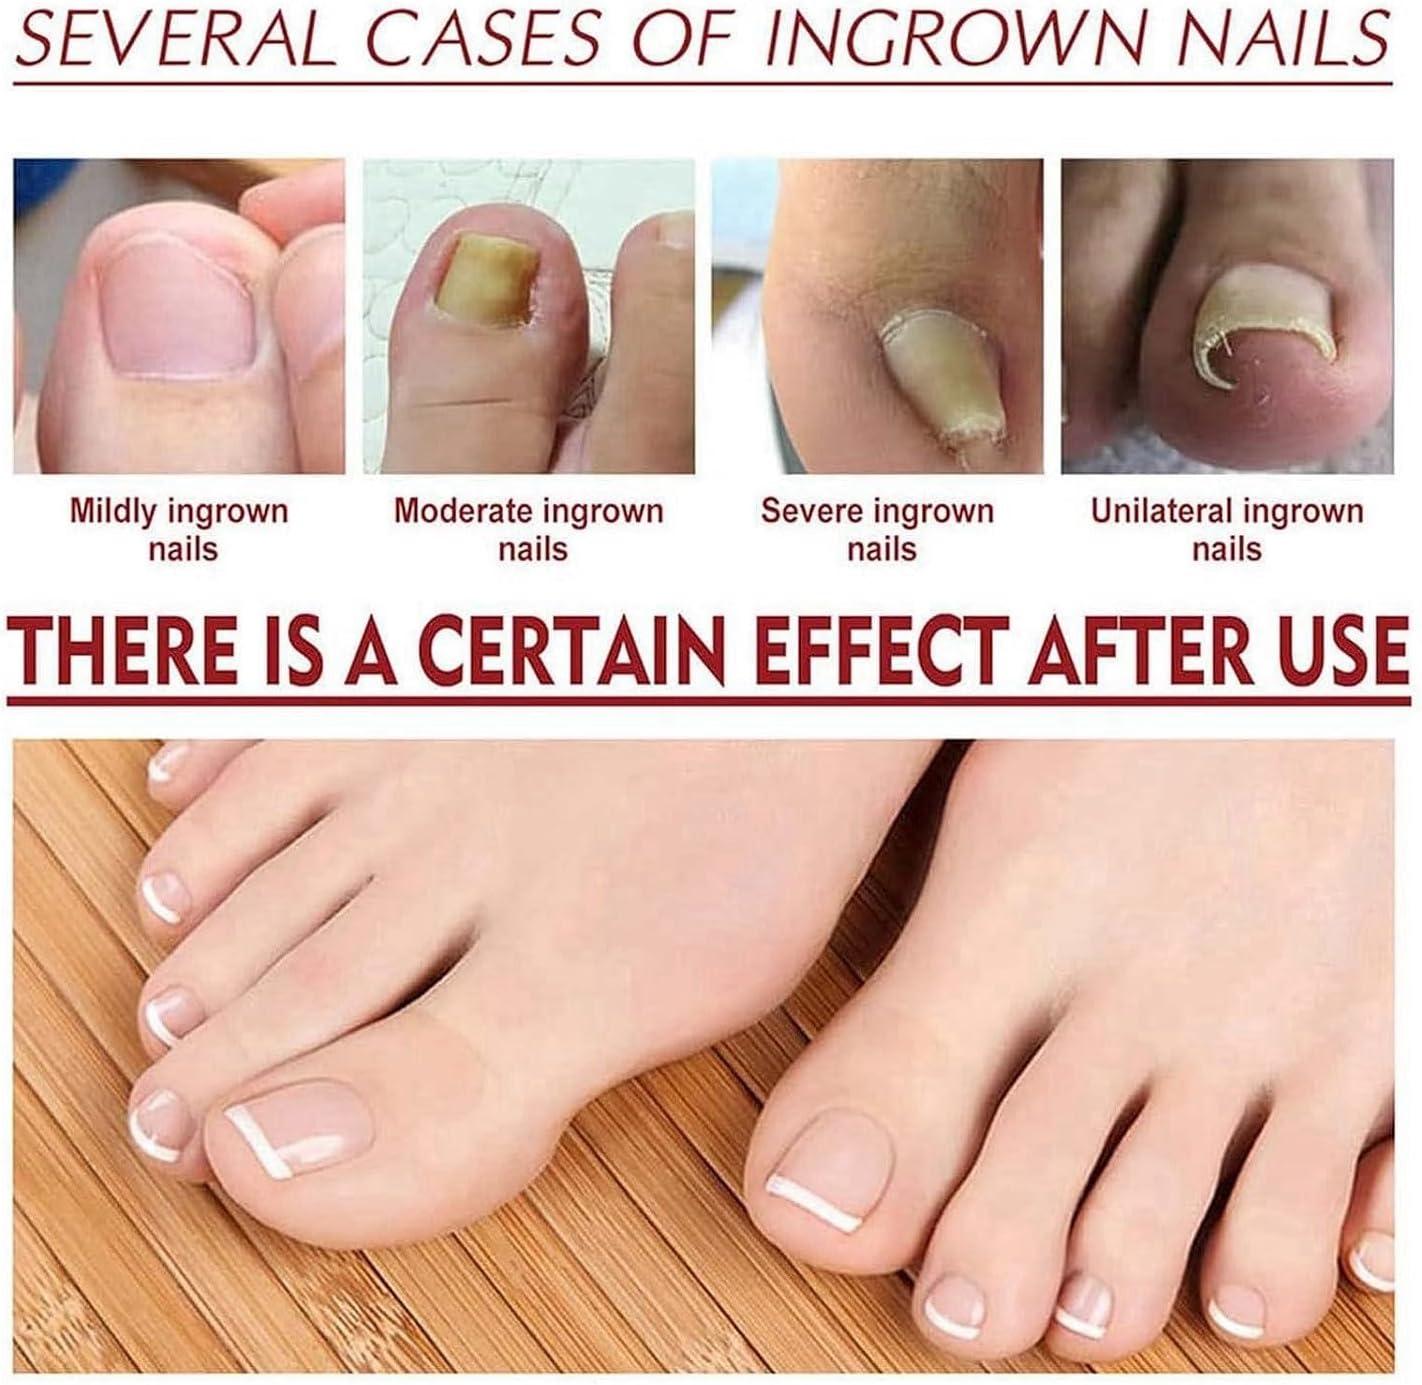 Home Care for an Ingrown Toenail: South Sound Foot & Ankle: Podiatric  Medicine and Surgery